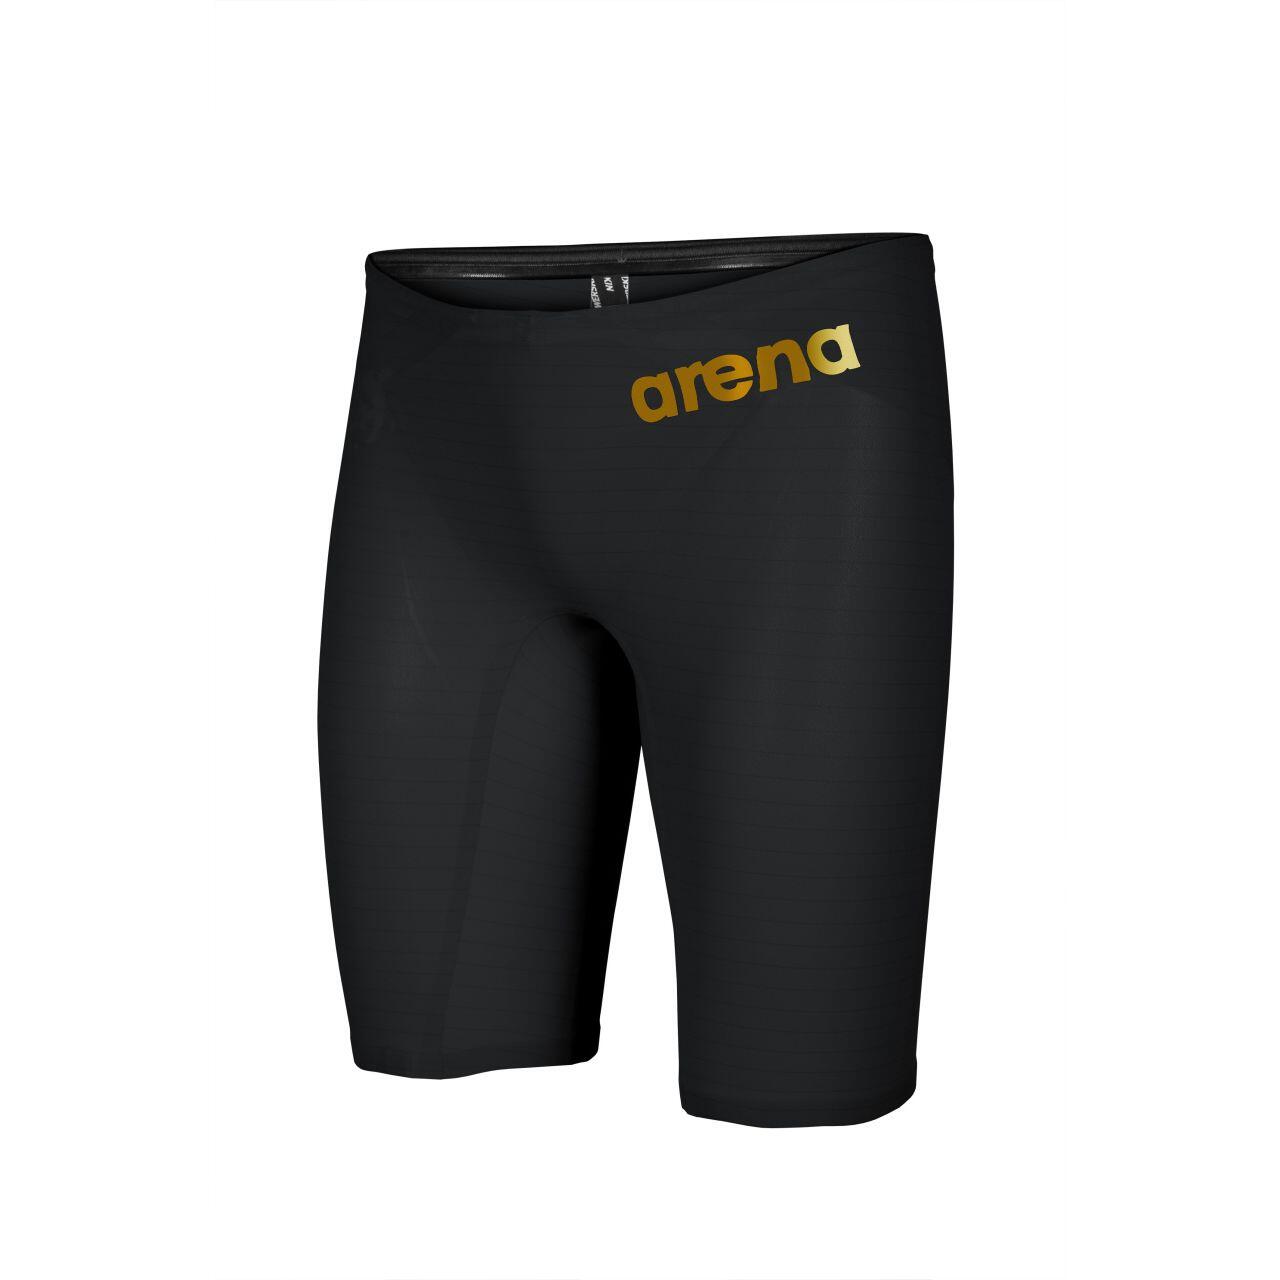 Arena Powerskin Carbon Air 2 Jammer - Black and Gold 1/5